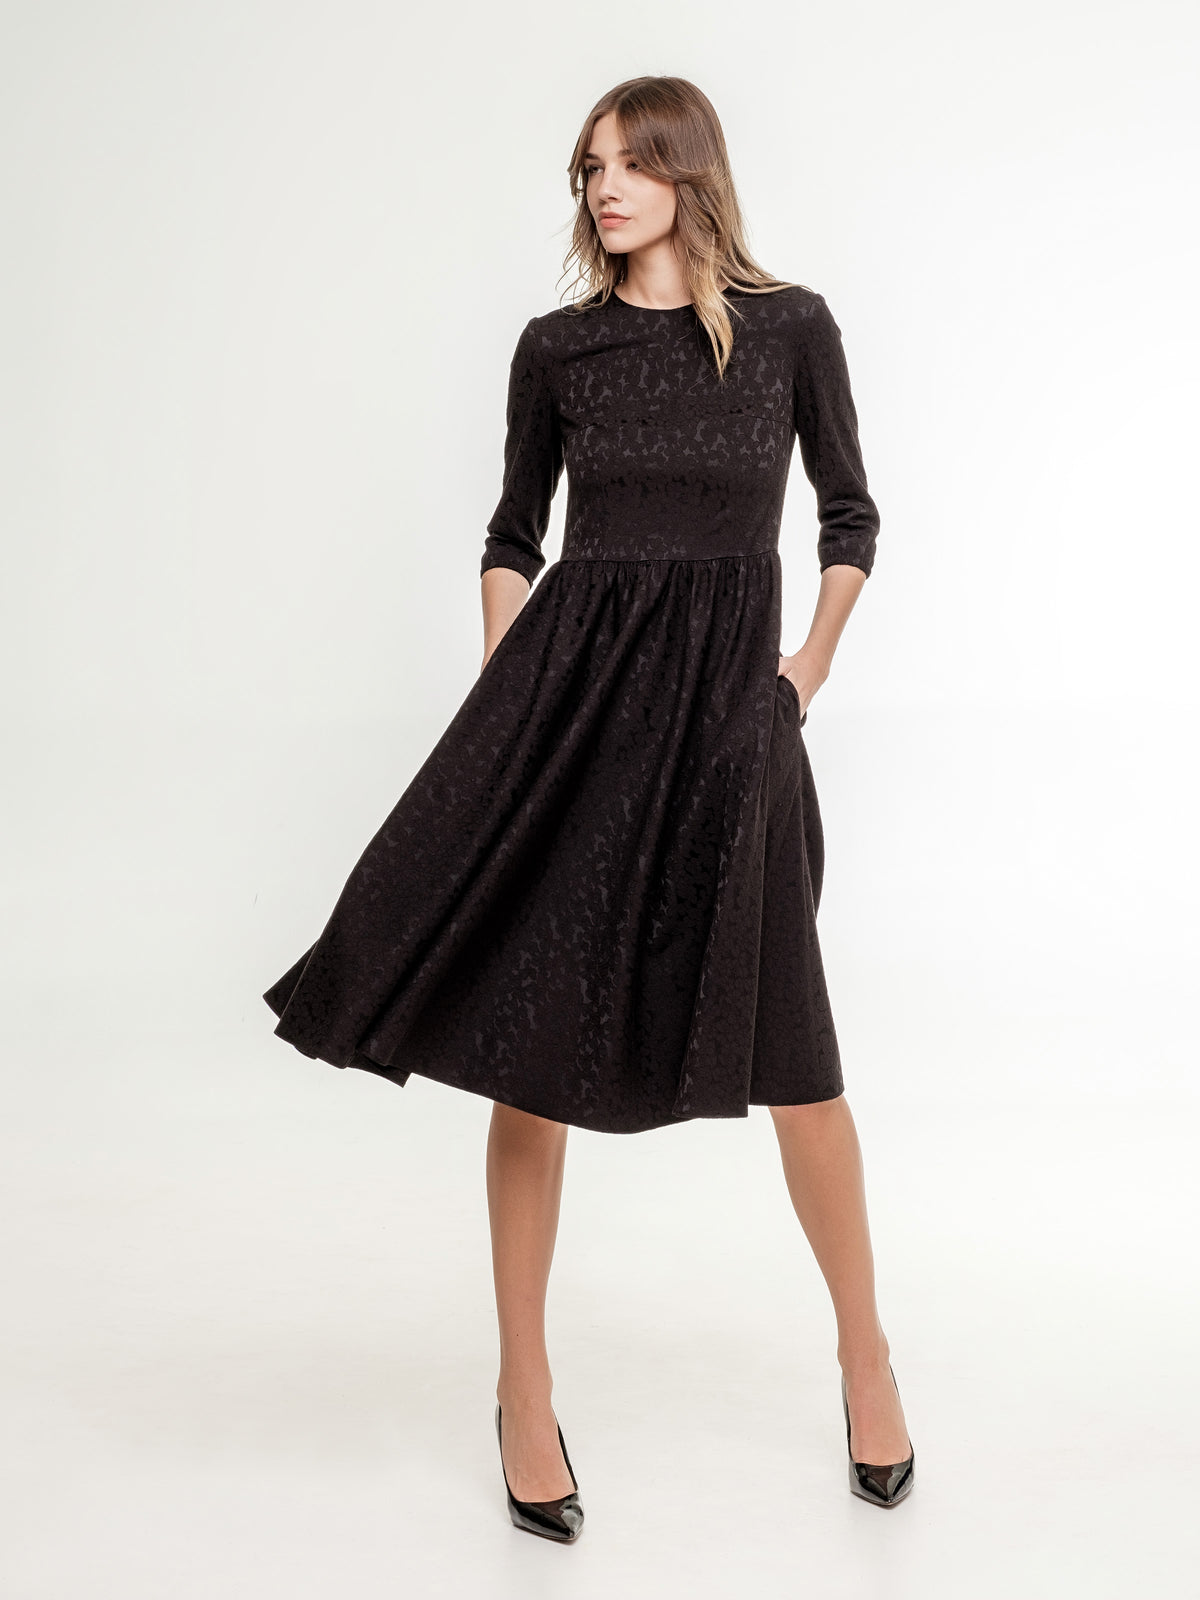 Black midi dress with floral texture